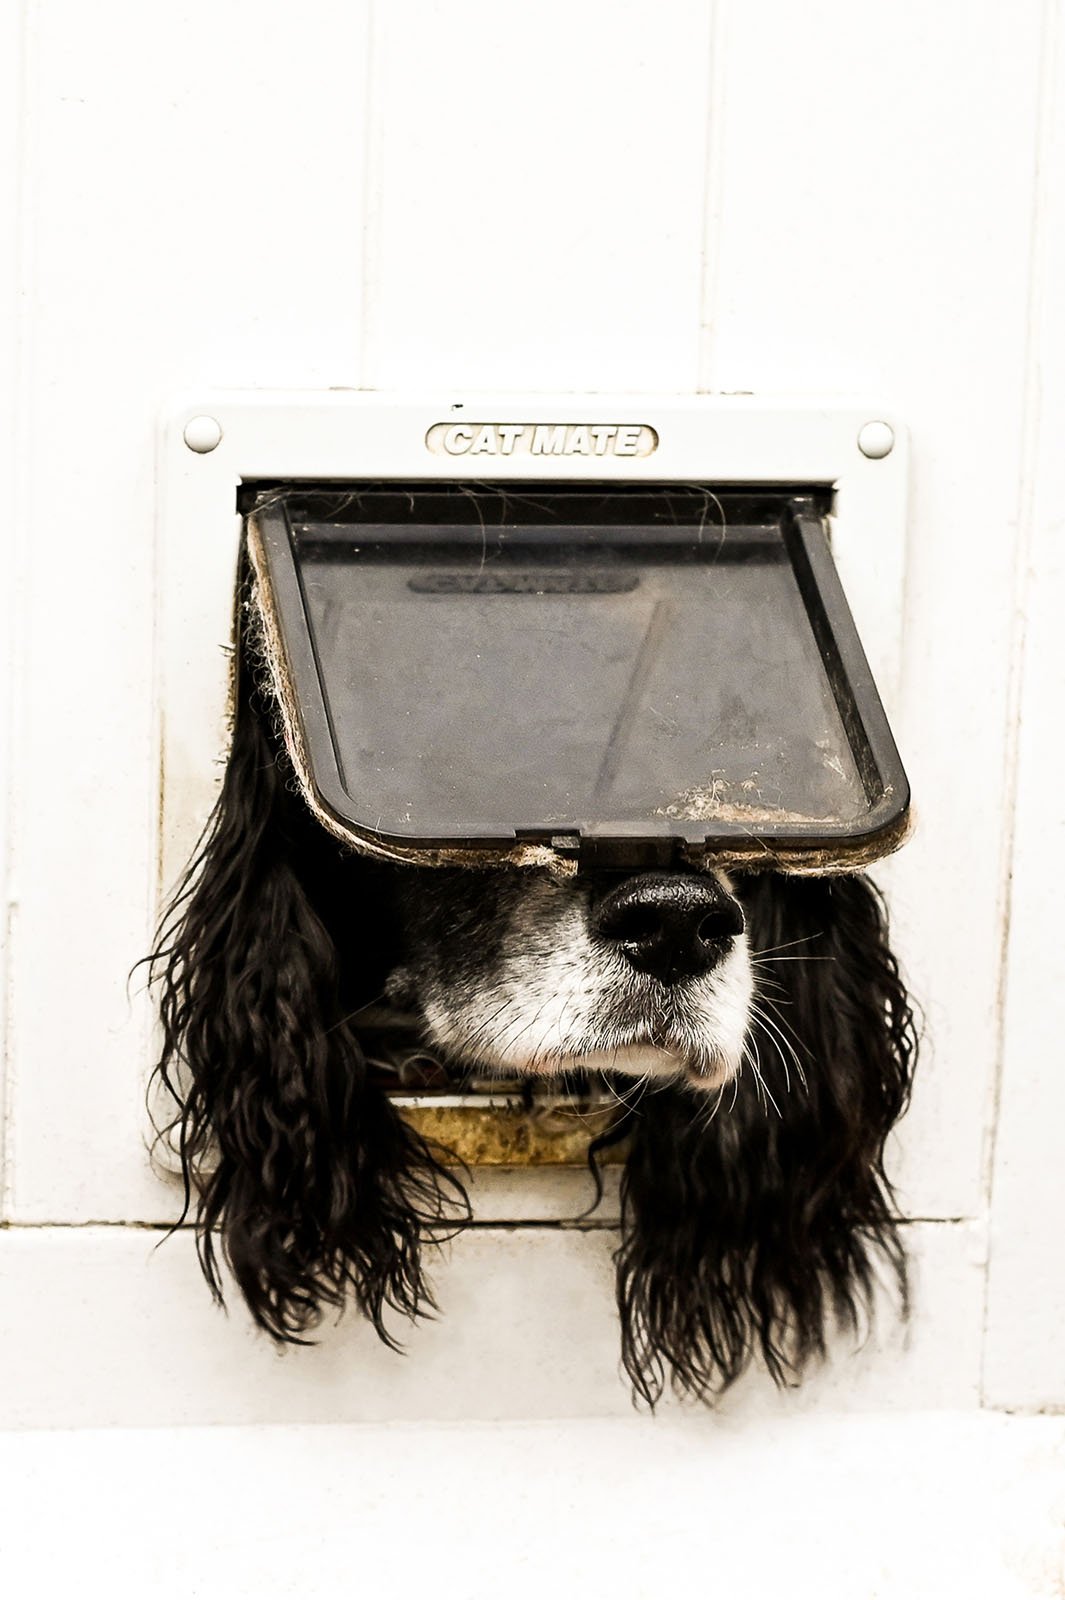 A black and white dog with long, floppy ears is peeking its head through a small pet door. The pet door flap is resting on the dog's head as it looks to the side. The frame of the door reads "CAT MATE". The background is a plain white wall.